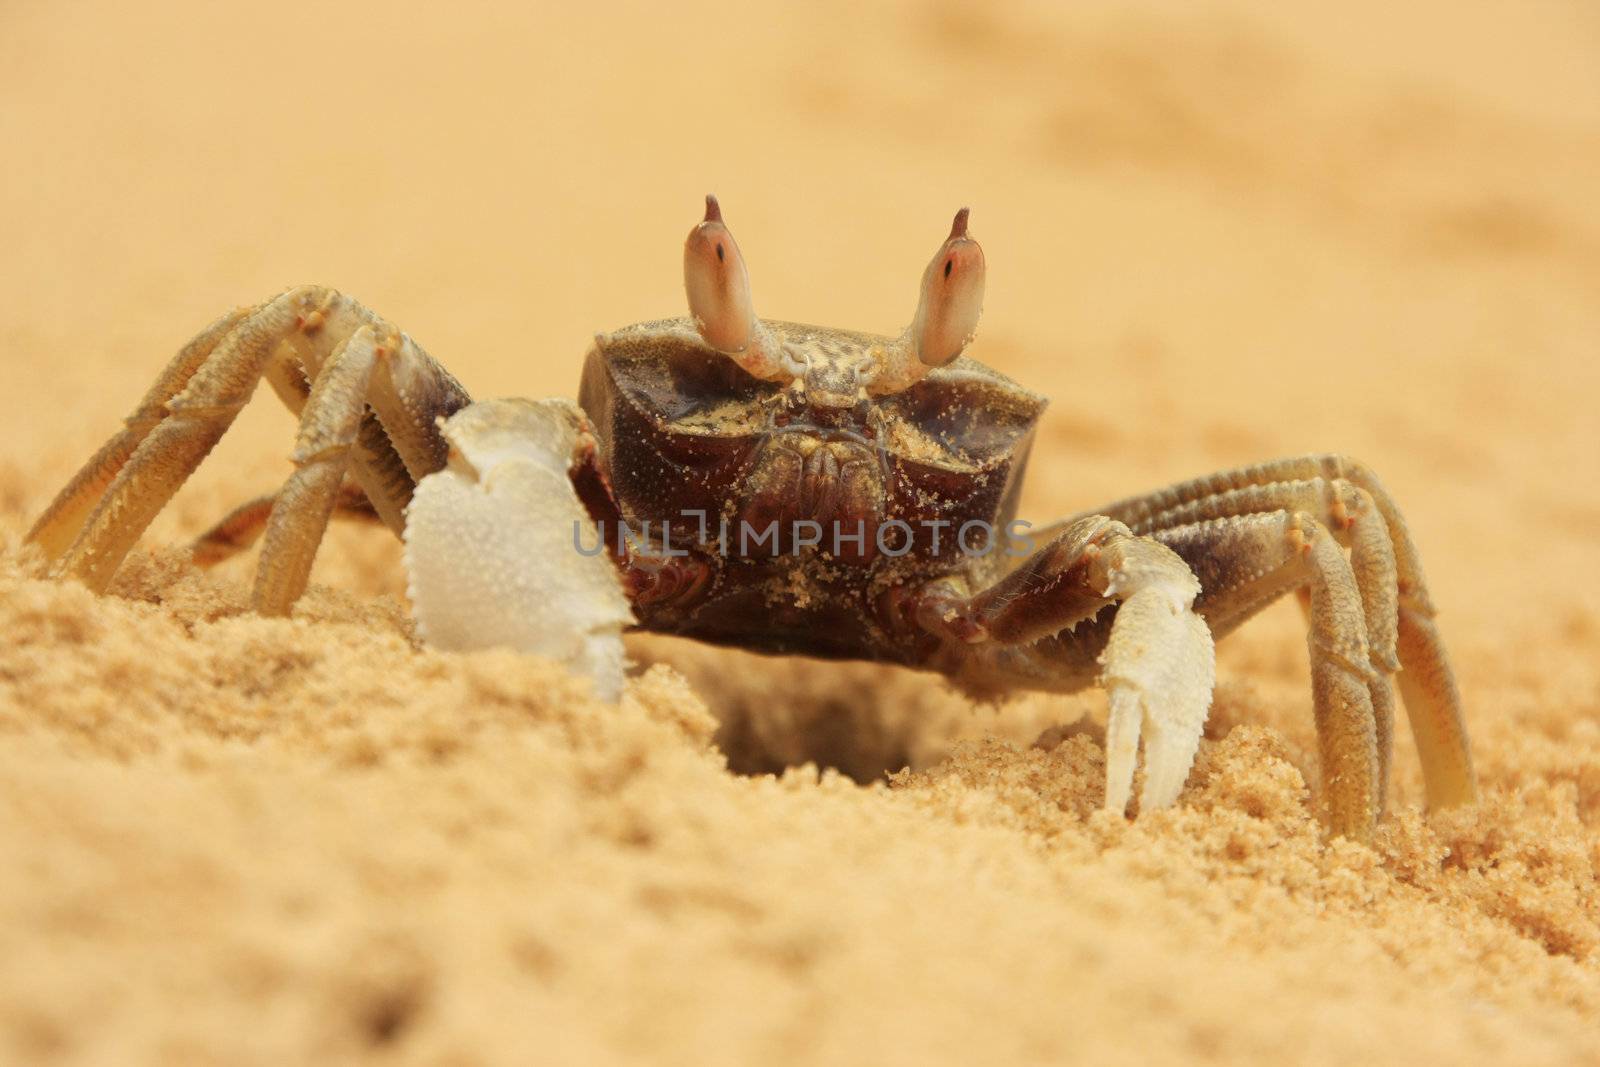 Horn-eyed ghost crab (Ocypode ceratophthalmus) by donya_nedomam